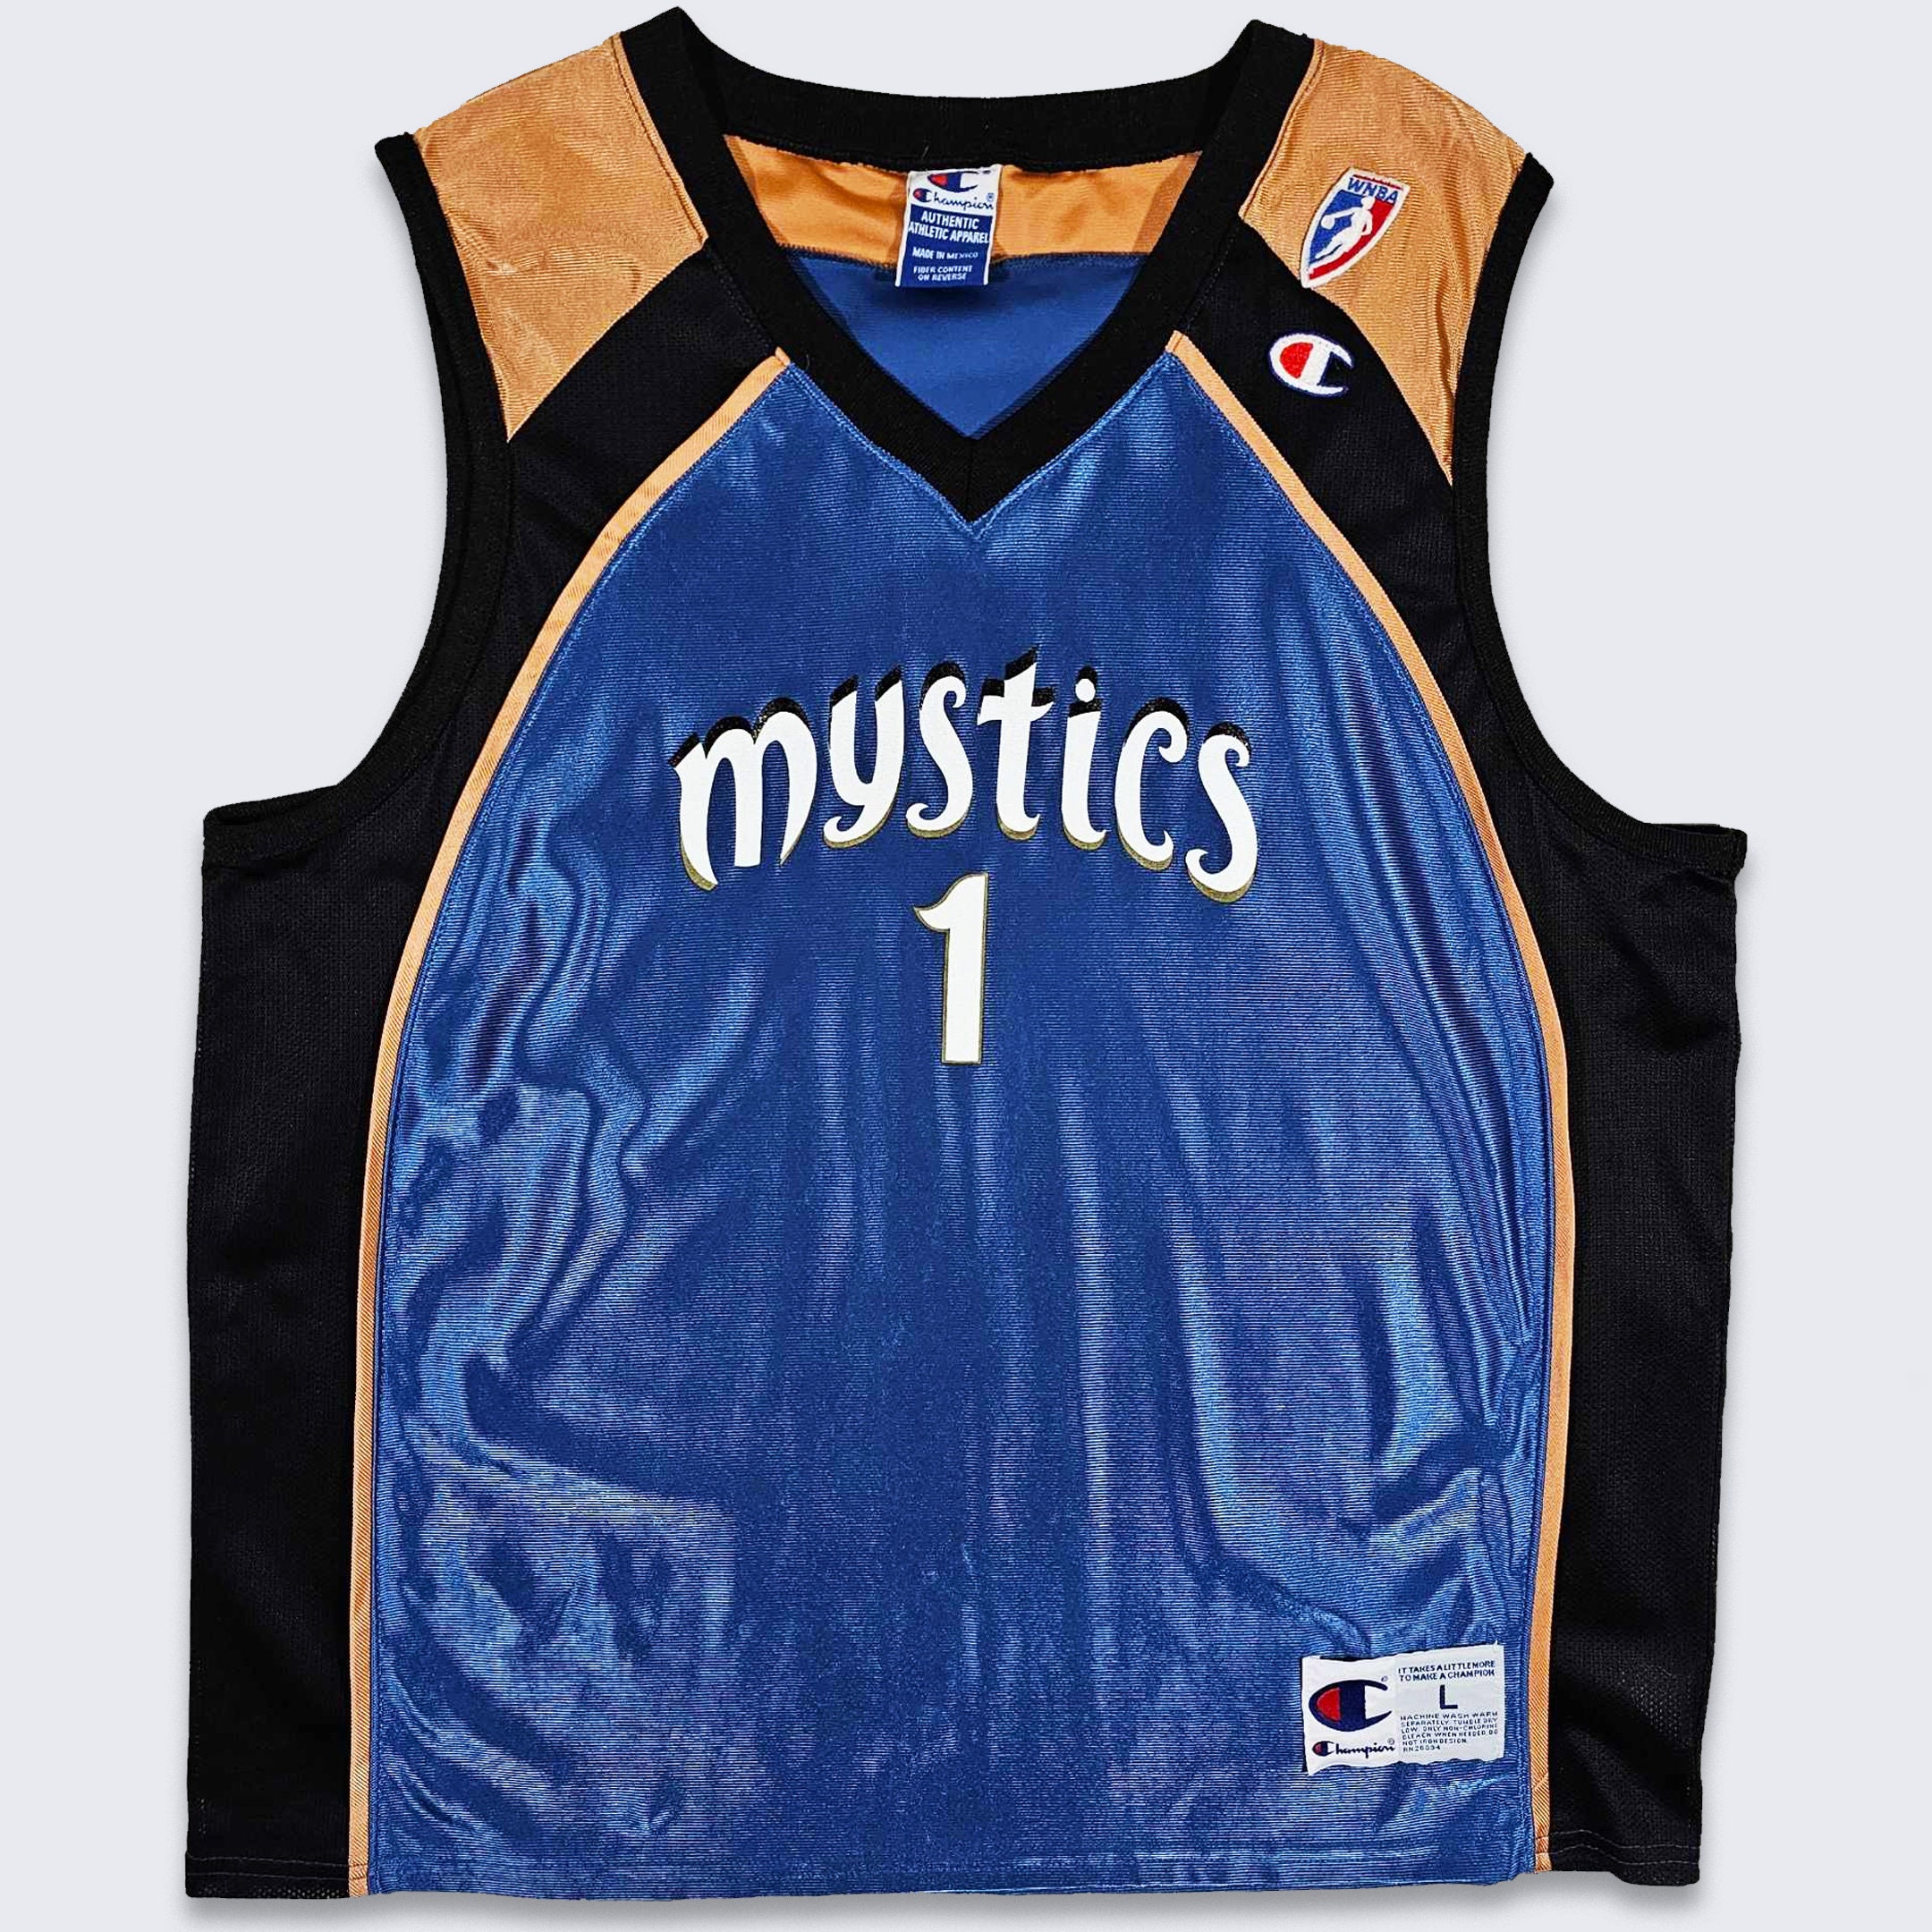 The WNBA's first jerseys are classic '90s throwbacks: baggy